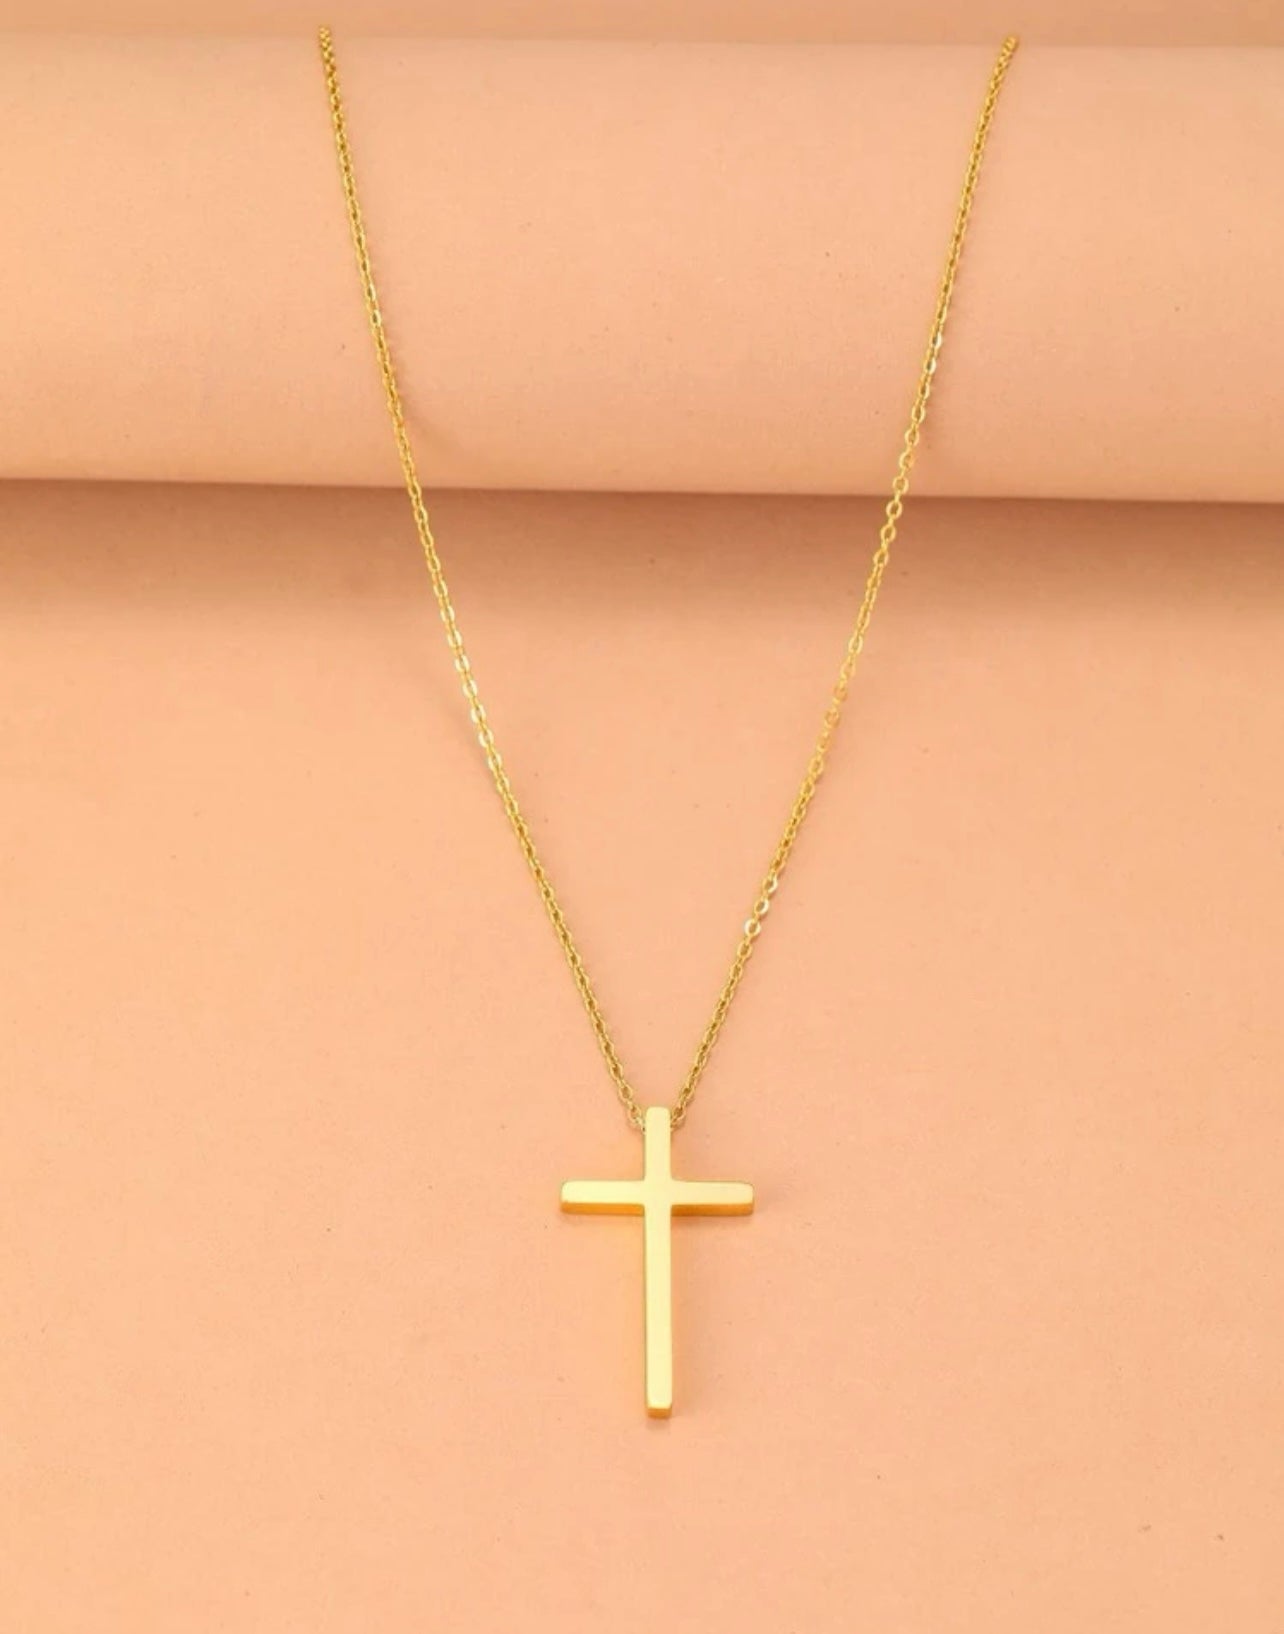 Beautiful Gold or Silver Cross Necklace